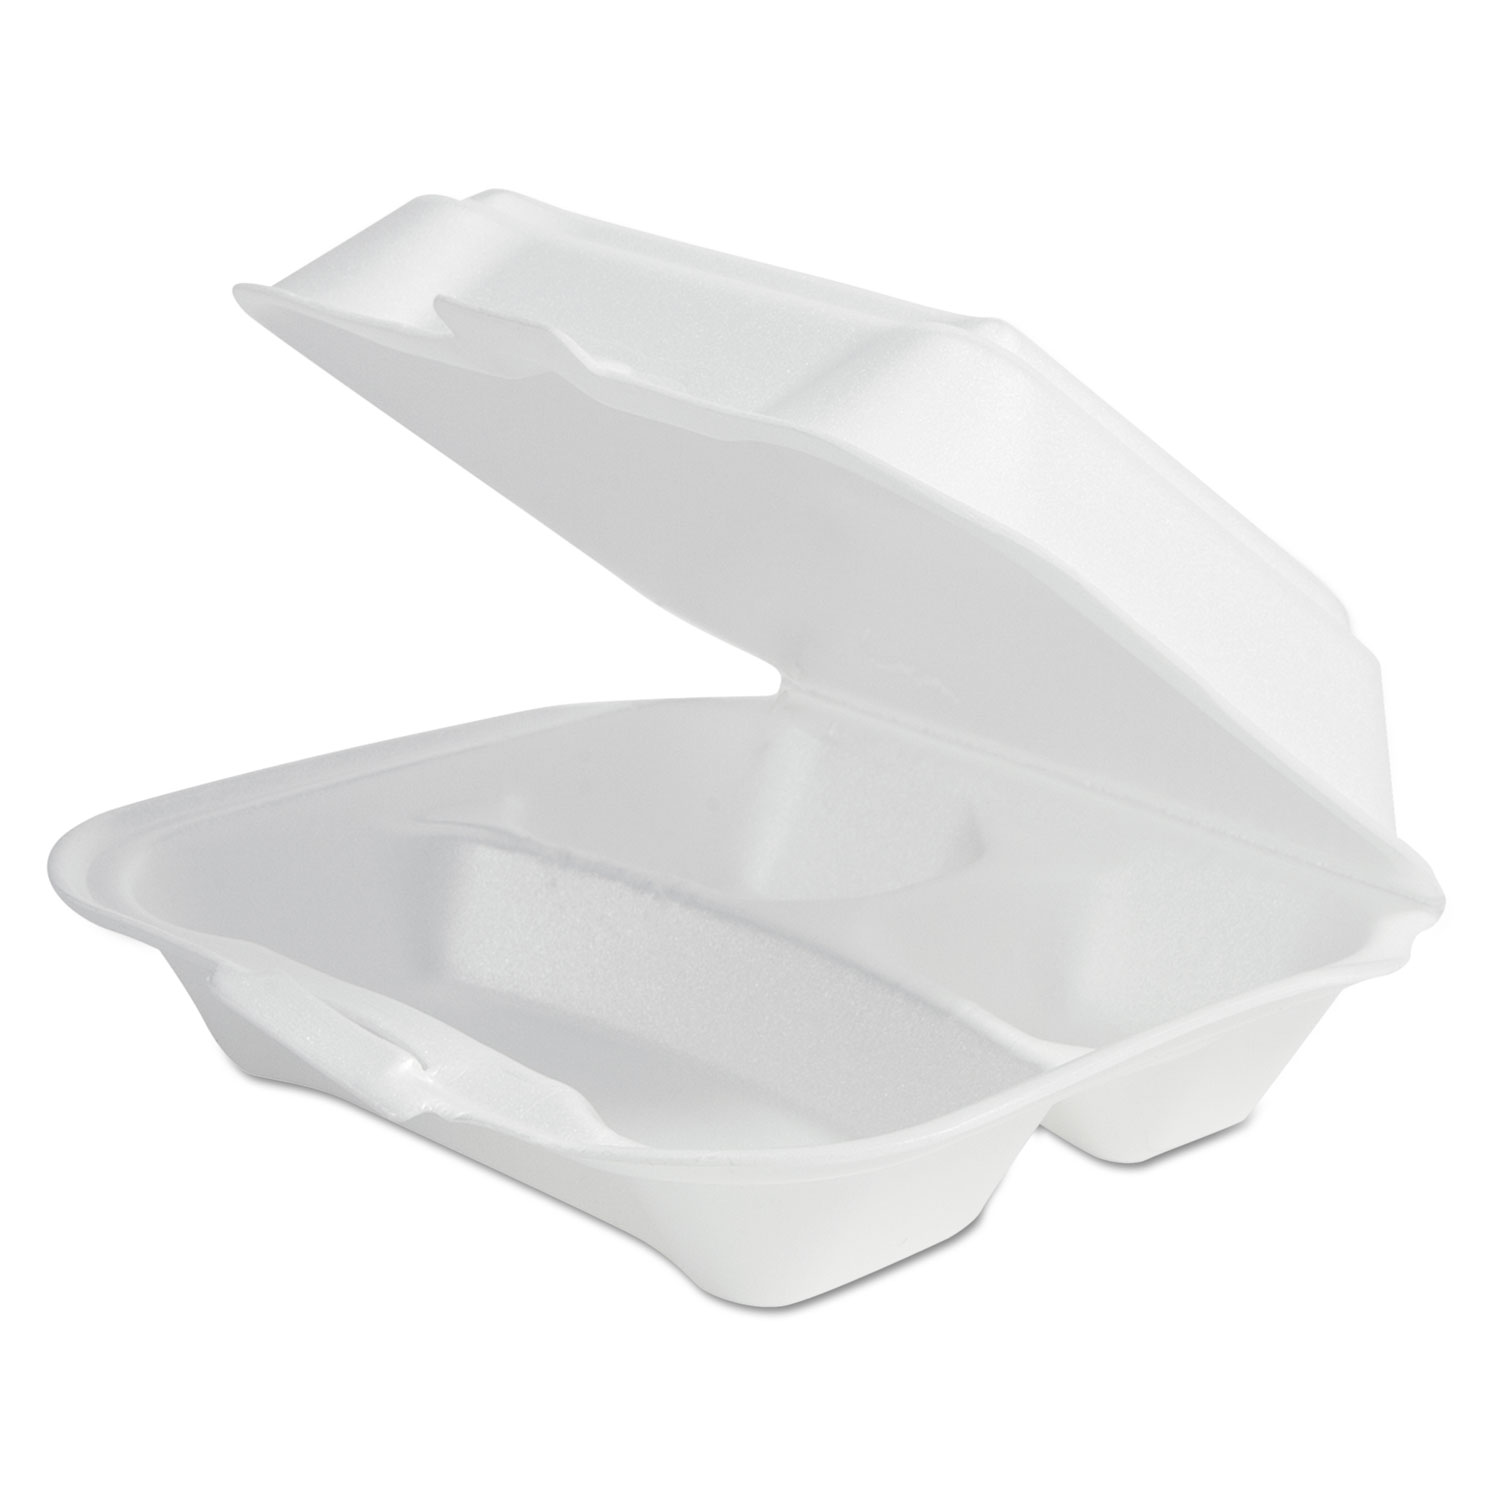  Plastifar PST 12039 Double-Foam Food Containers, Poly Bag, 8 x 8 x 3, White, 3-Compartment, 2/Carton (PST12039) 